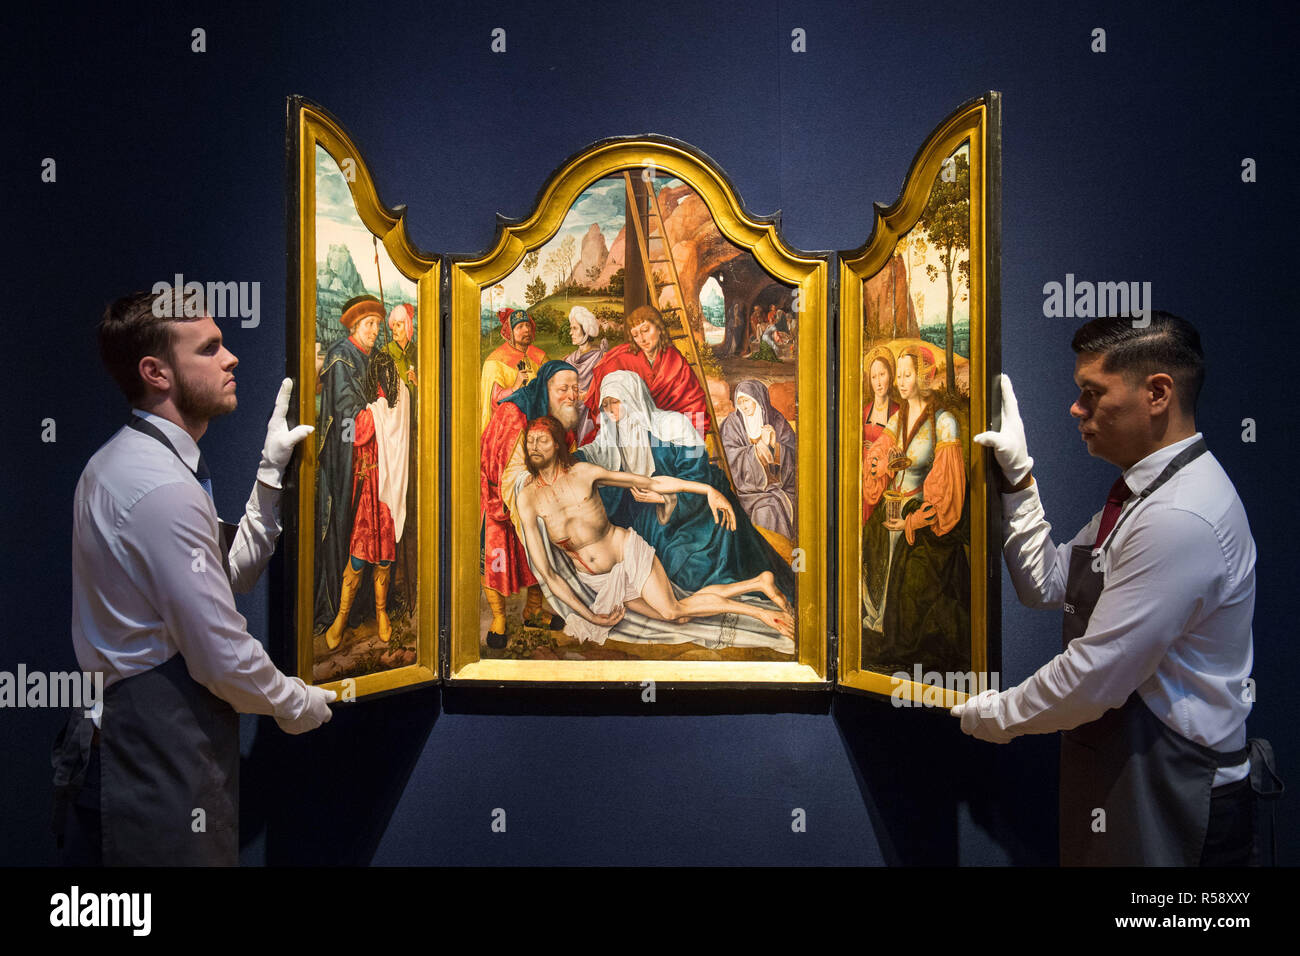 Christie's art handlers with a triptych painting from the Antwerp School, dated circa 1500-1550, valued at &pound;250,000 - &pound;350,000, on show at Christie's saleroom in central London ahead of the auction house's forthcoming Classic Week sales. Stock Photo